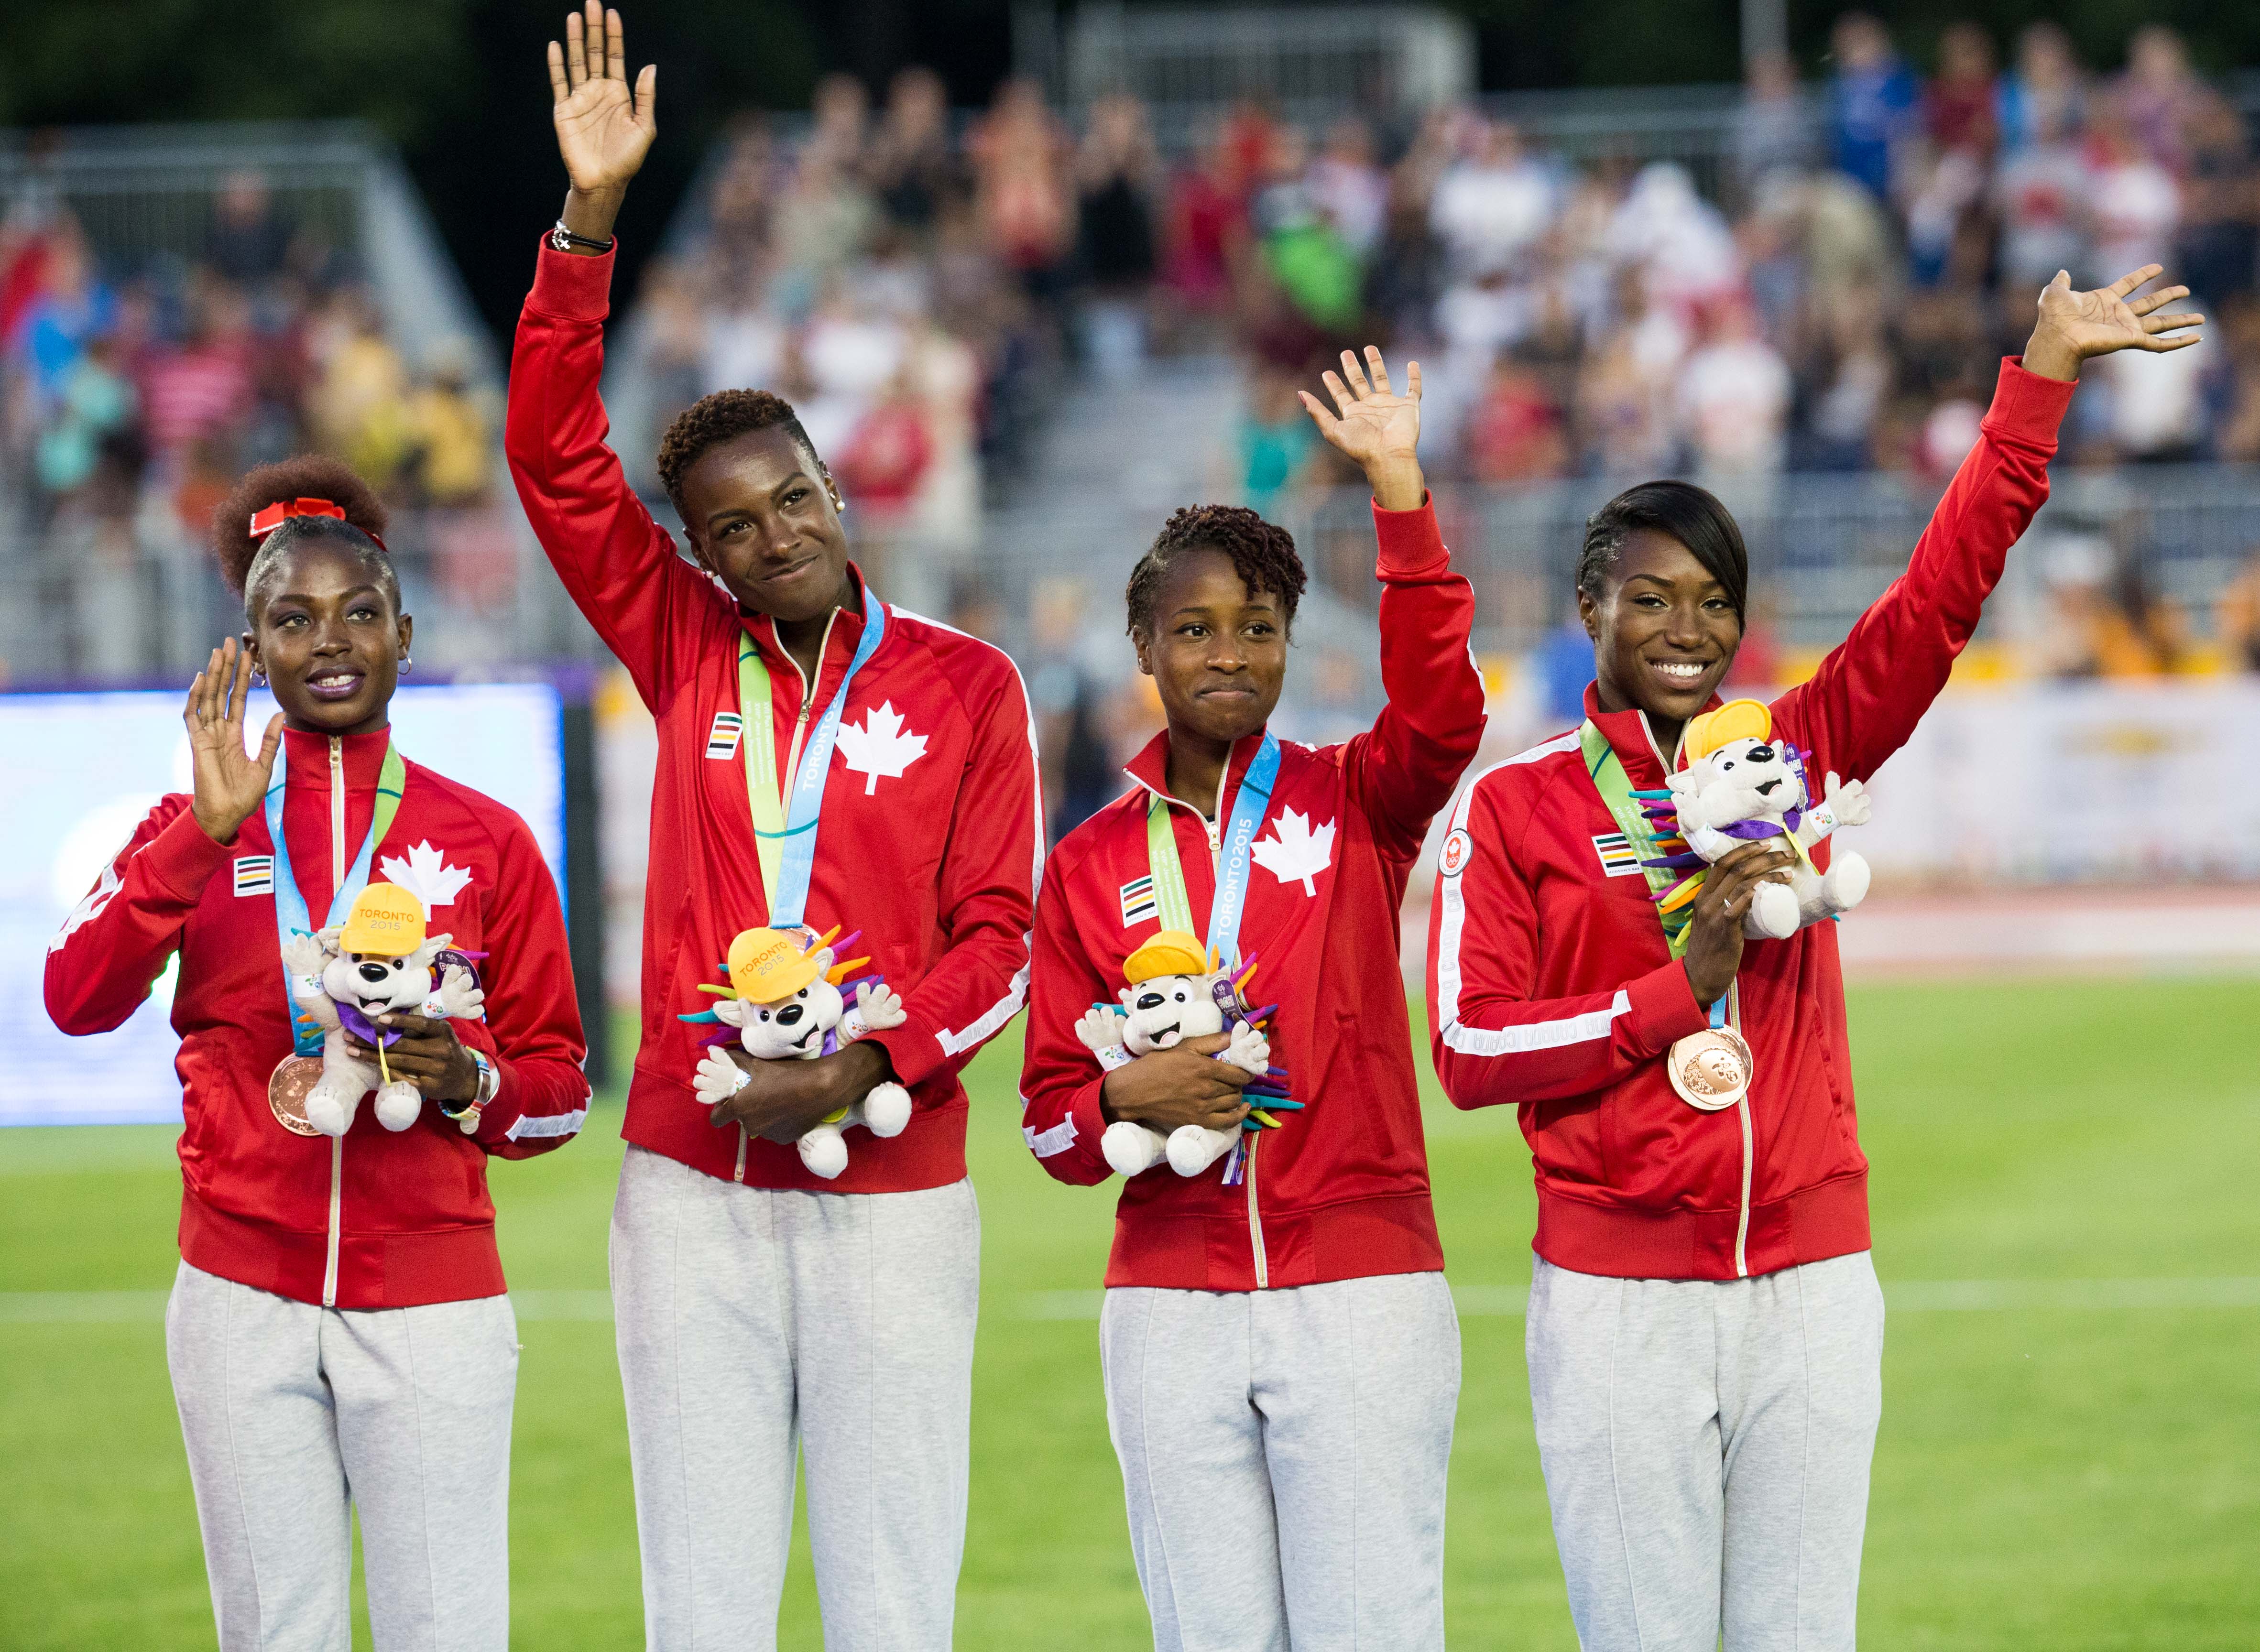 The Canadian 4x100m relay team on the podium.